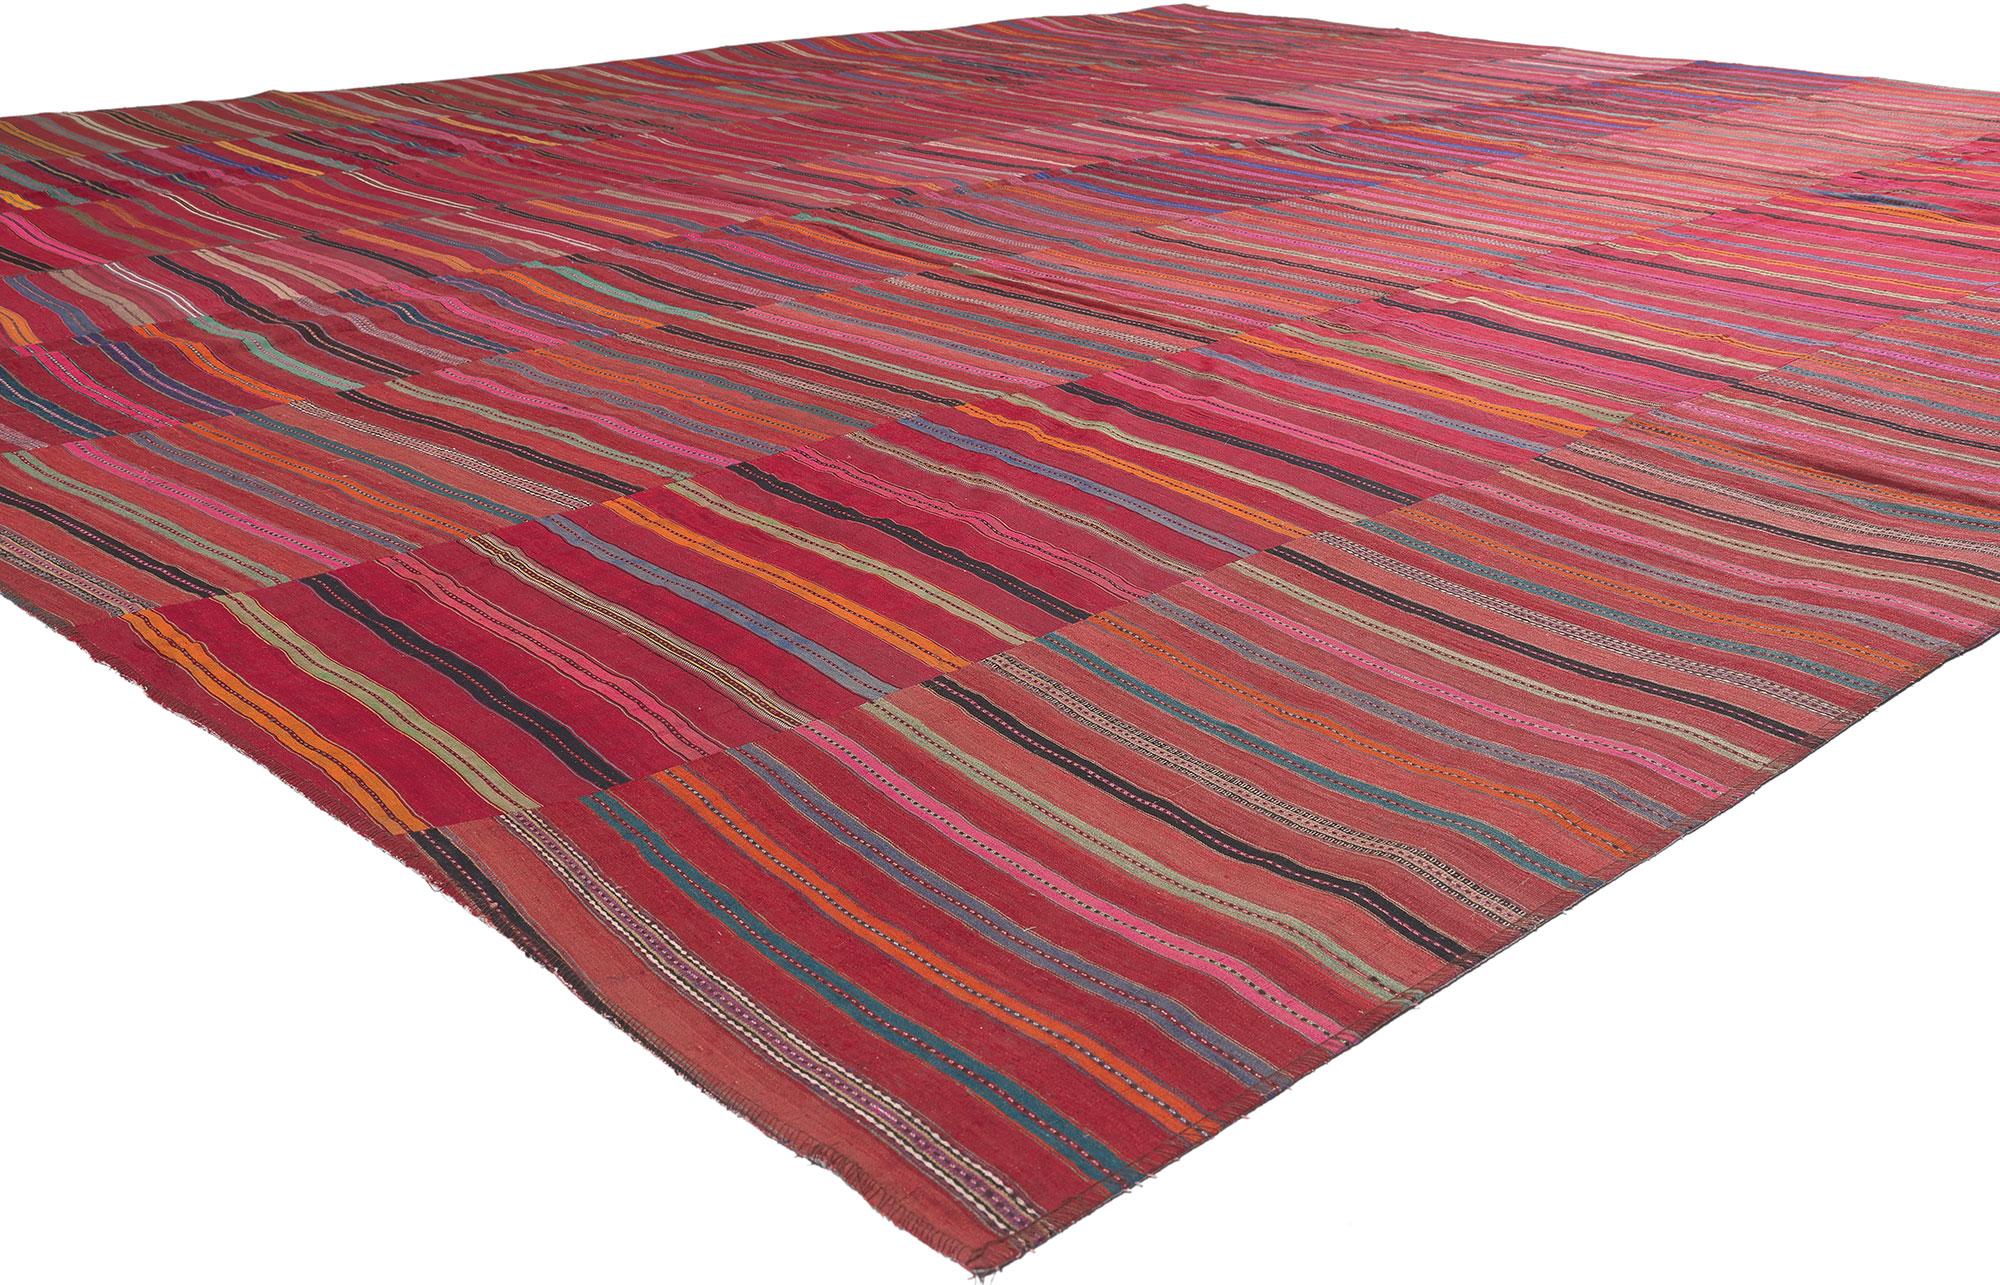 60639 Vintage Turkish Striped Kilim Rug, 11'00 x 13'02.
Rugged beauty meets rustic sensibility in this handwoven wool vintage Turkish kilim rug. The striped design and vibrant colors woven into this piece work together creating a modern yet cozy